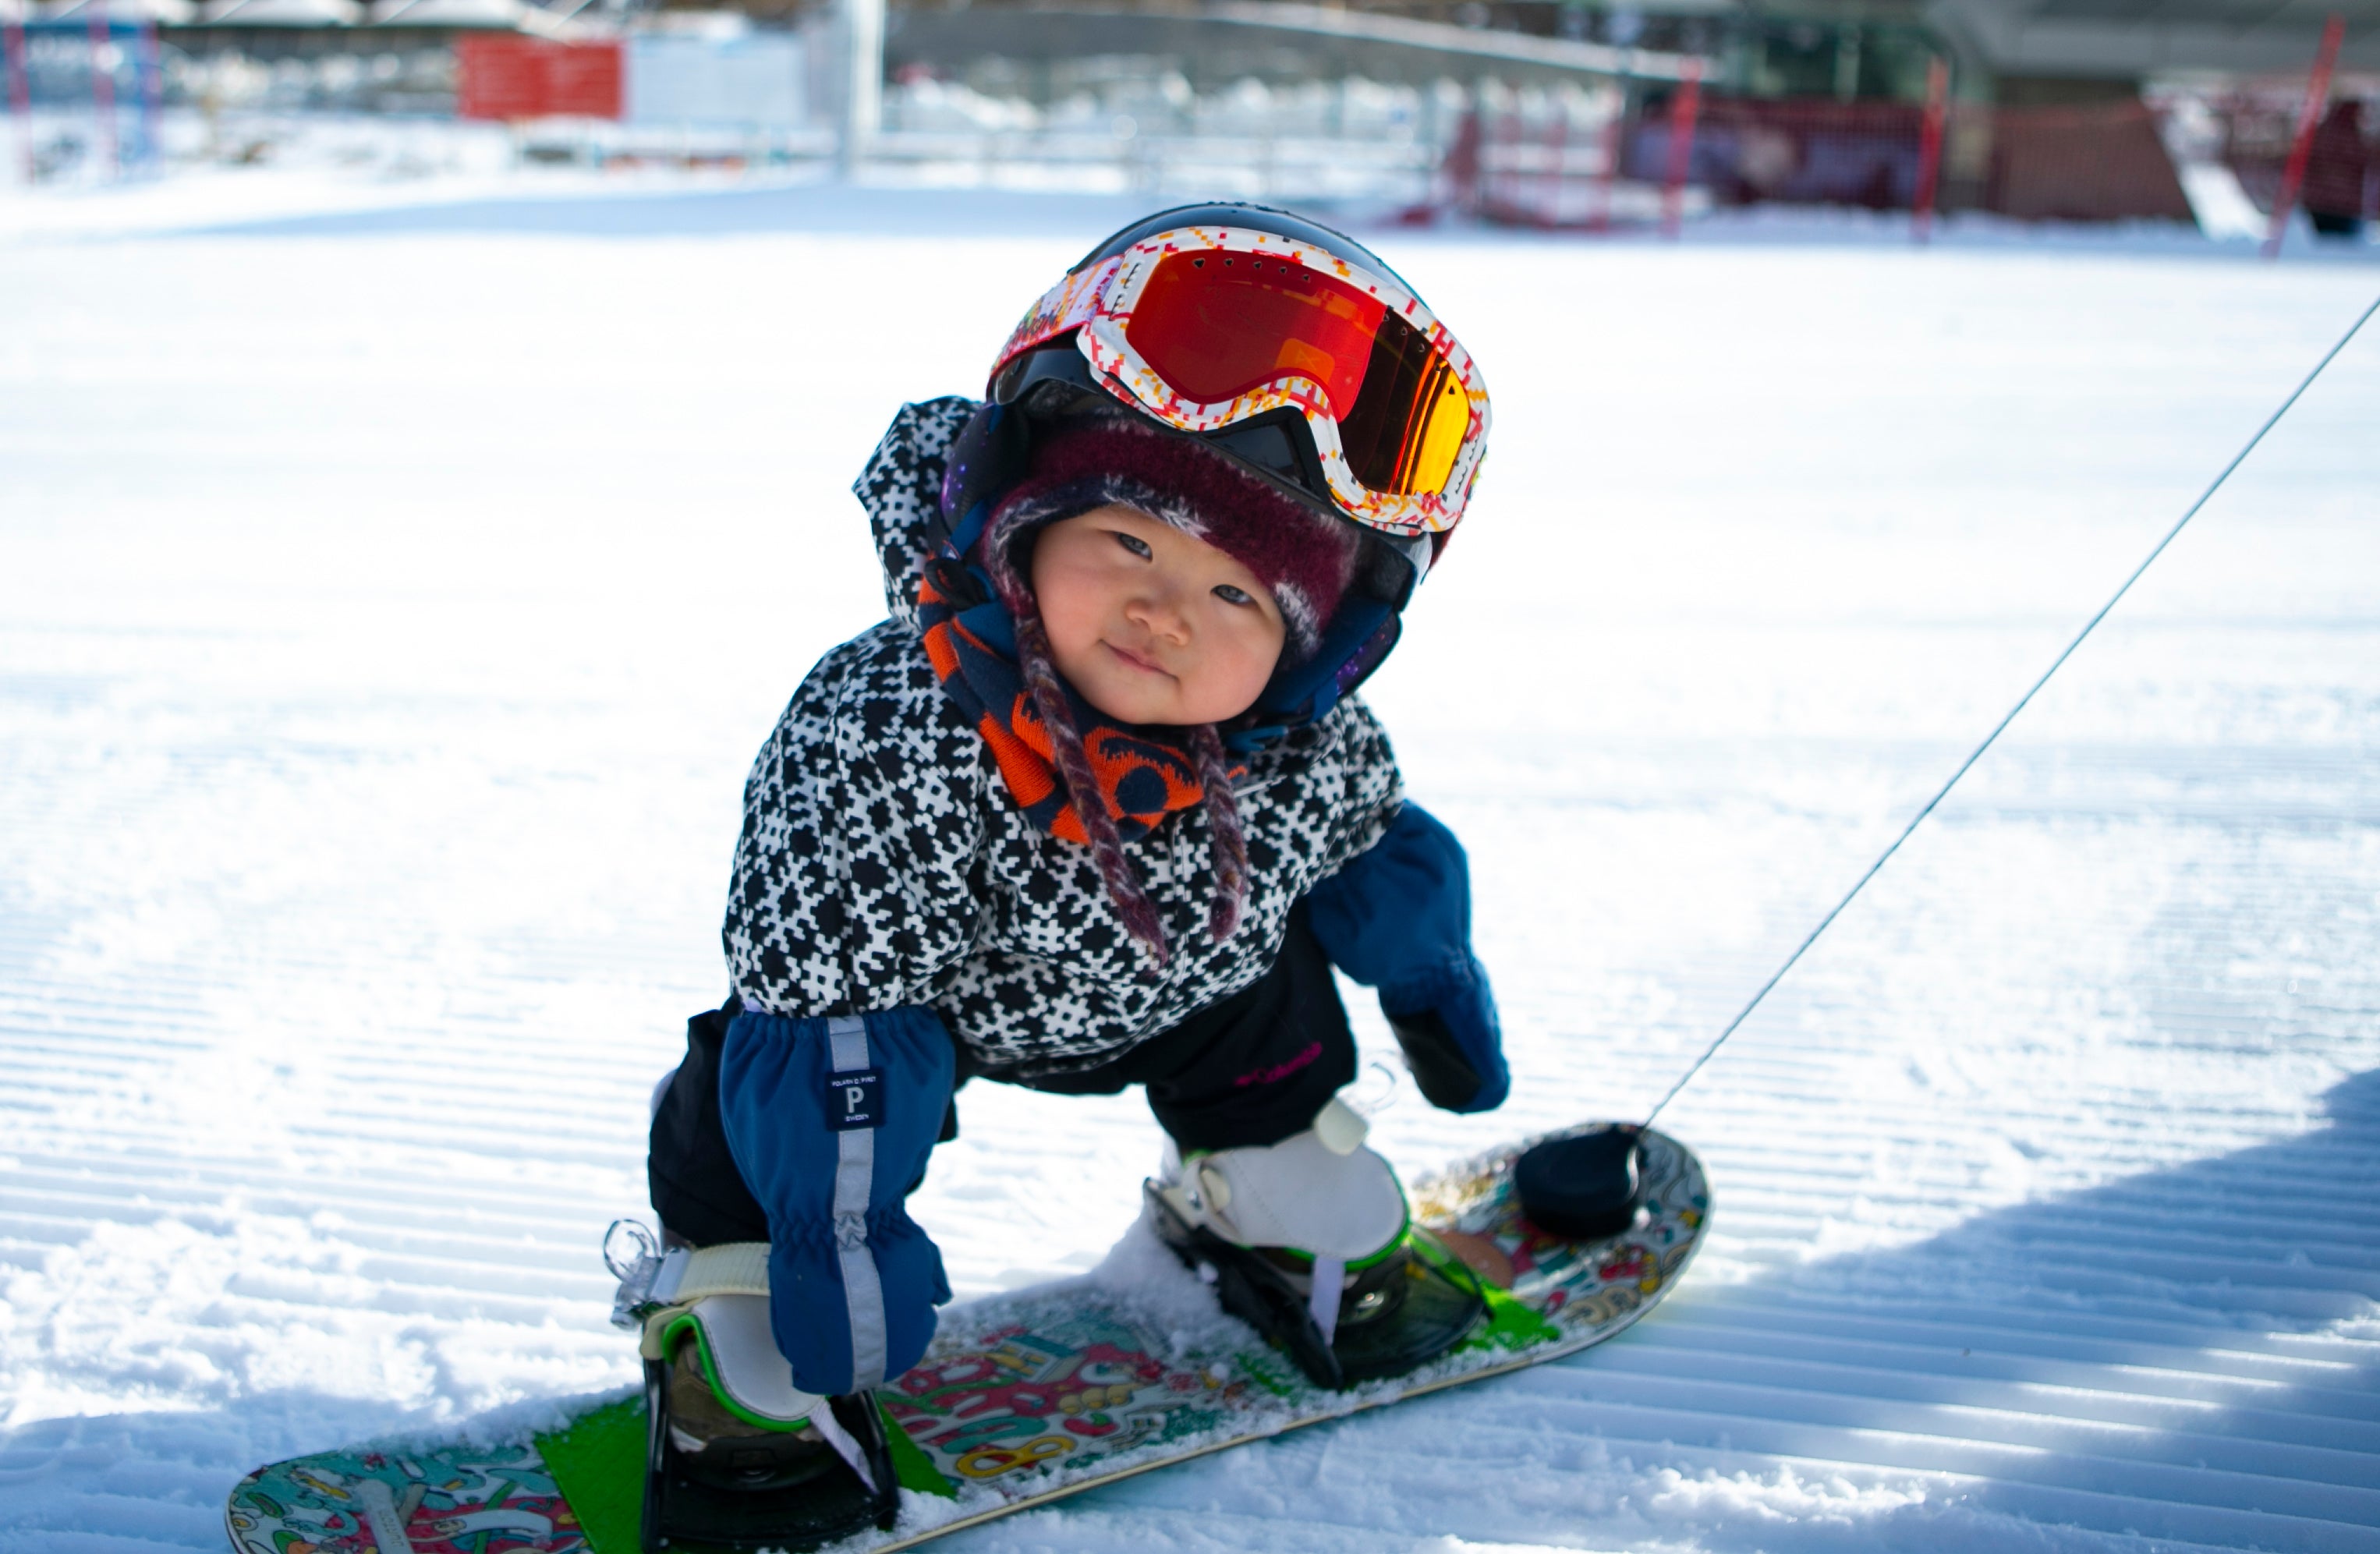 A toddler enjoys her first attempt at skiing at a ski resort in Zhangjiakou in November, 2021